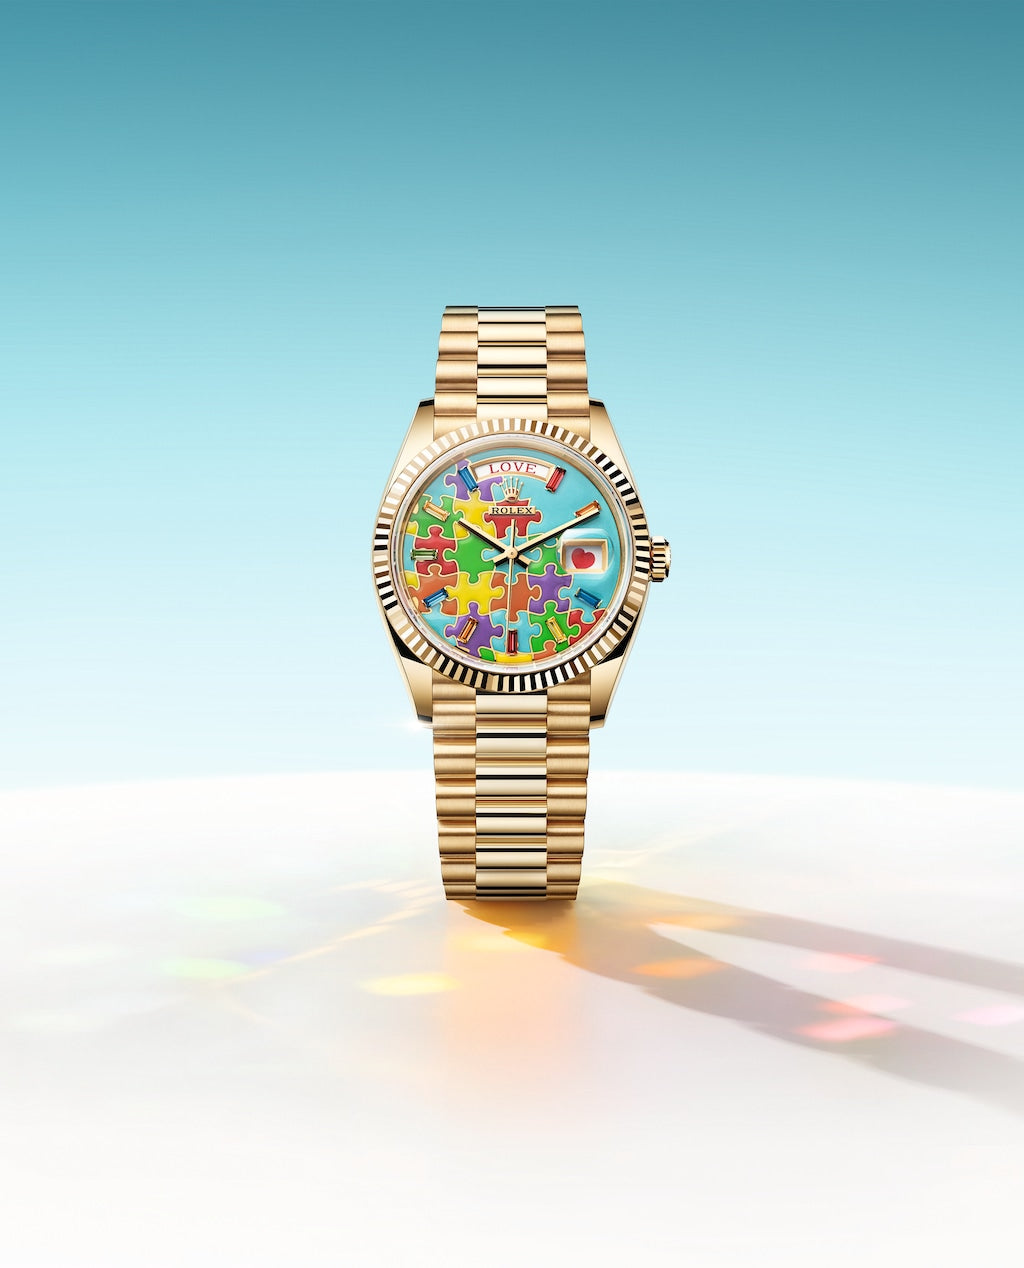 Rolex Day-Date 36 in Yellow Gold with Colorful Puzzle Motif and Love Date Message